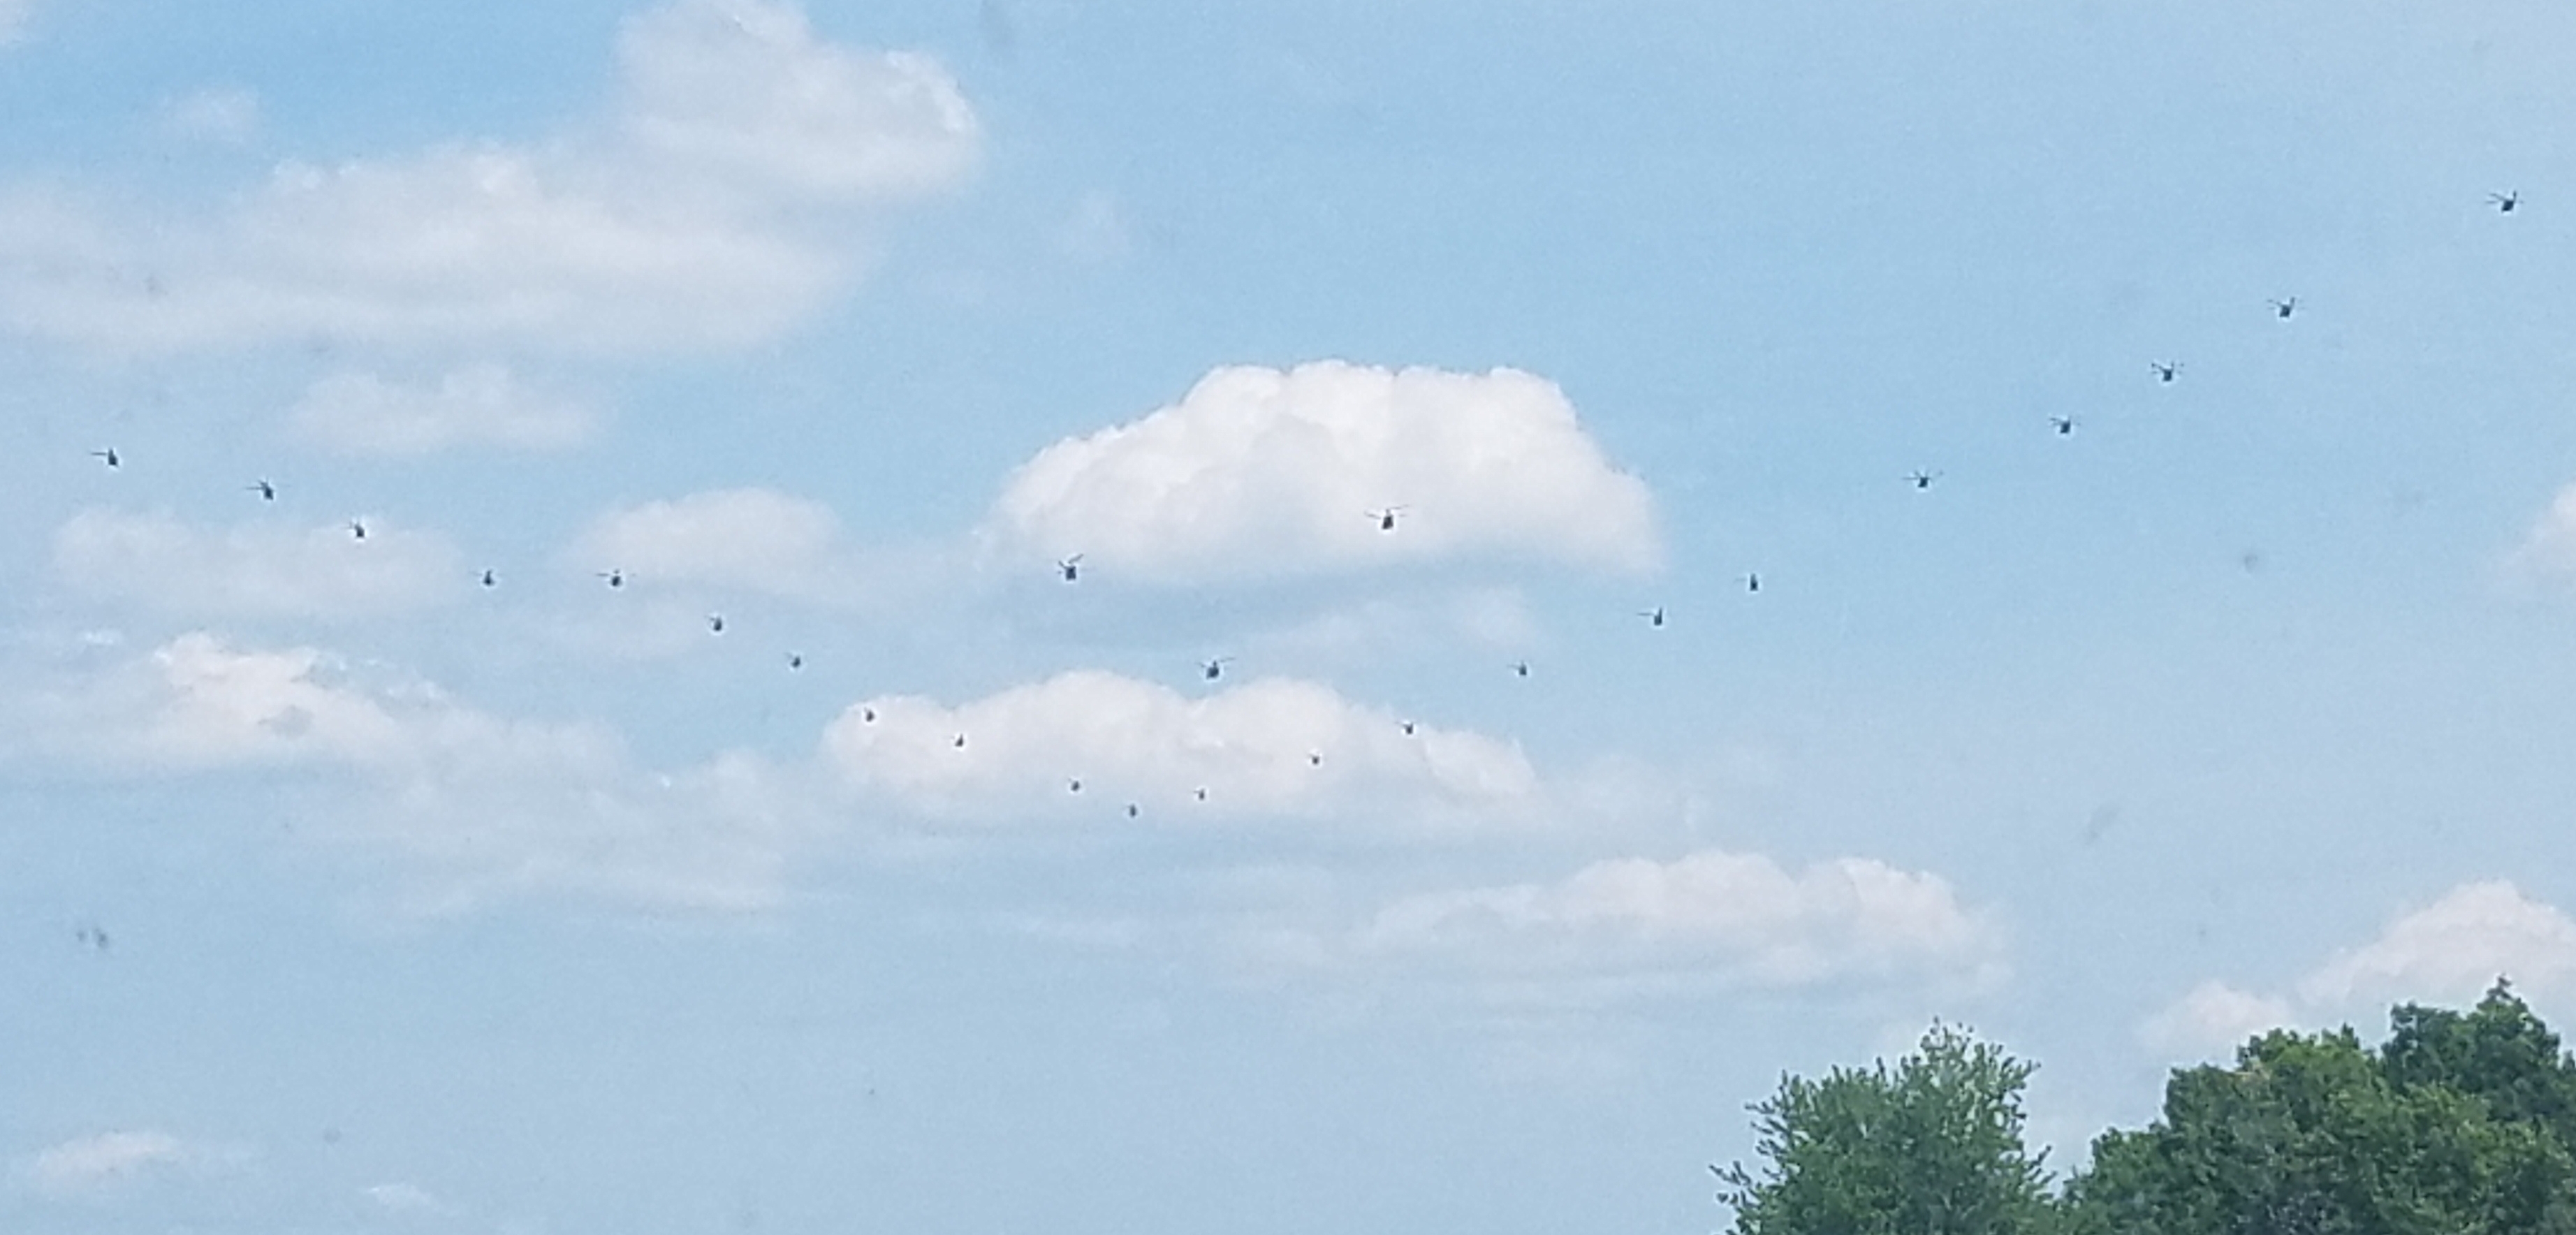 These Helicopters look like a smiley face